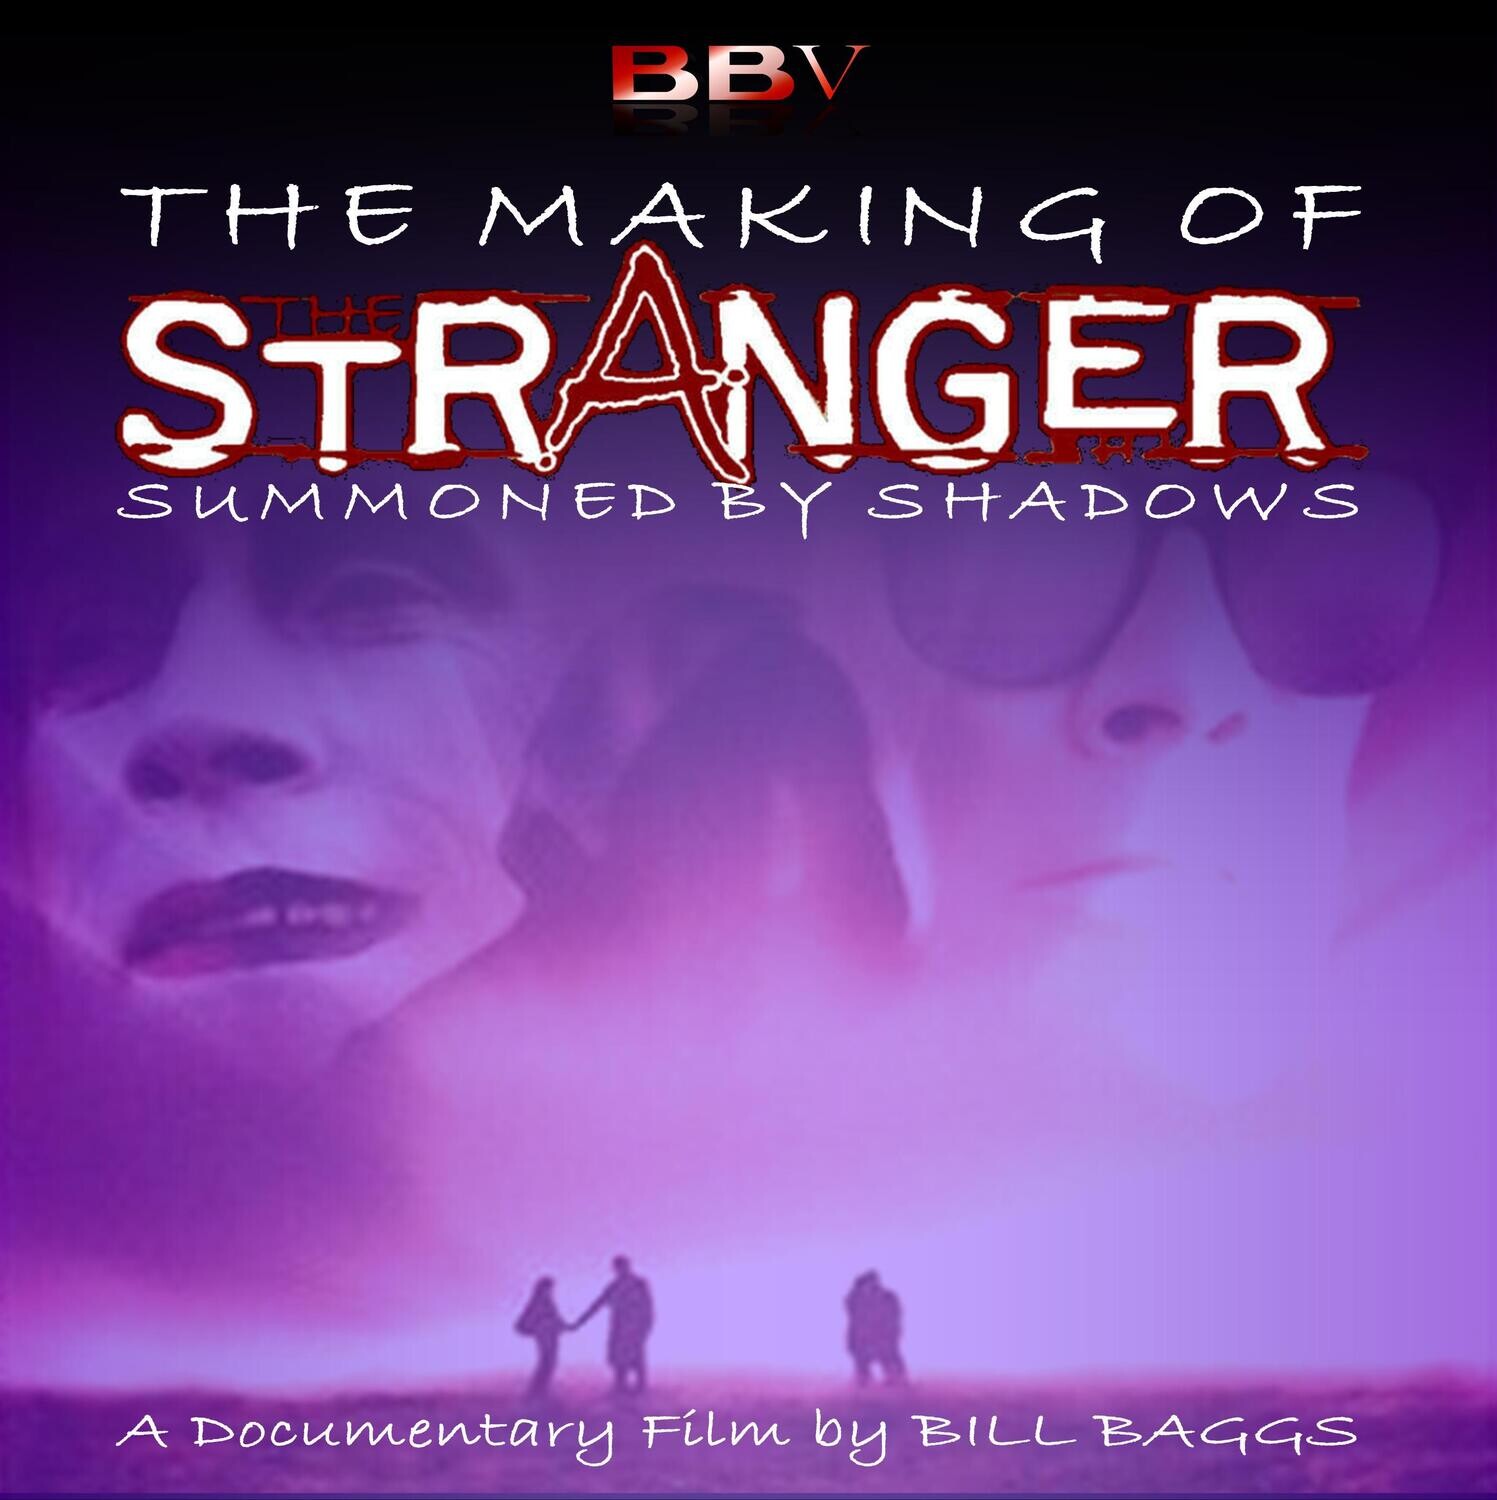 The Stranger: MAKING OF - Summoned by Shadows (VIDEO DOWNLOAD)